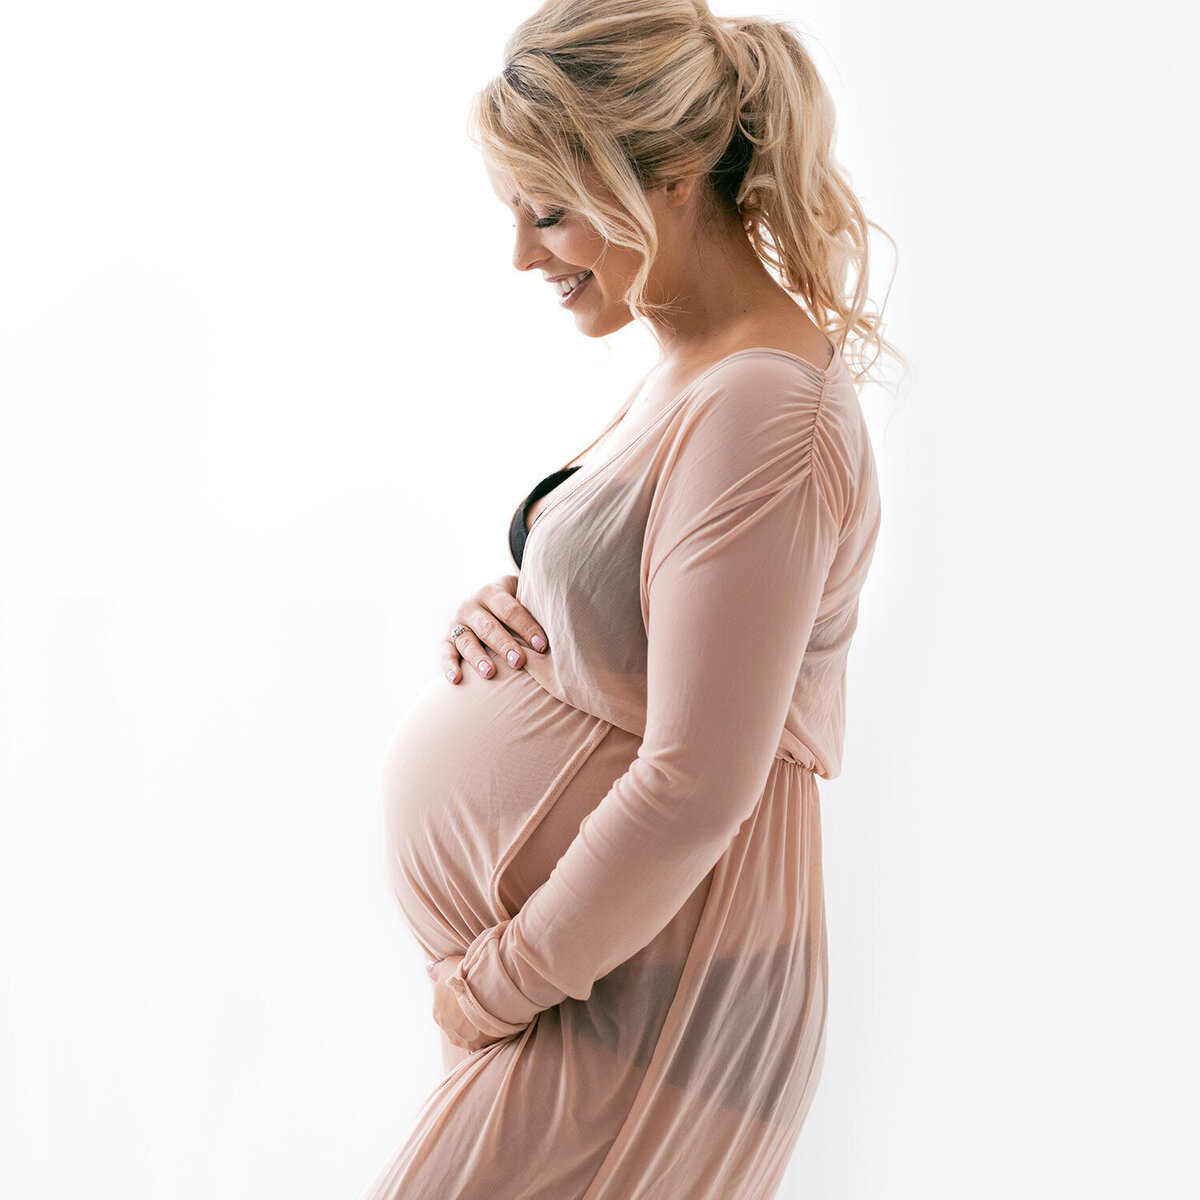 Artistic maternity photography of a woman showing off her bump